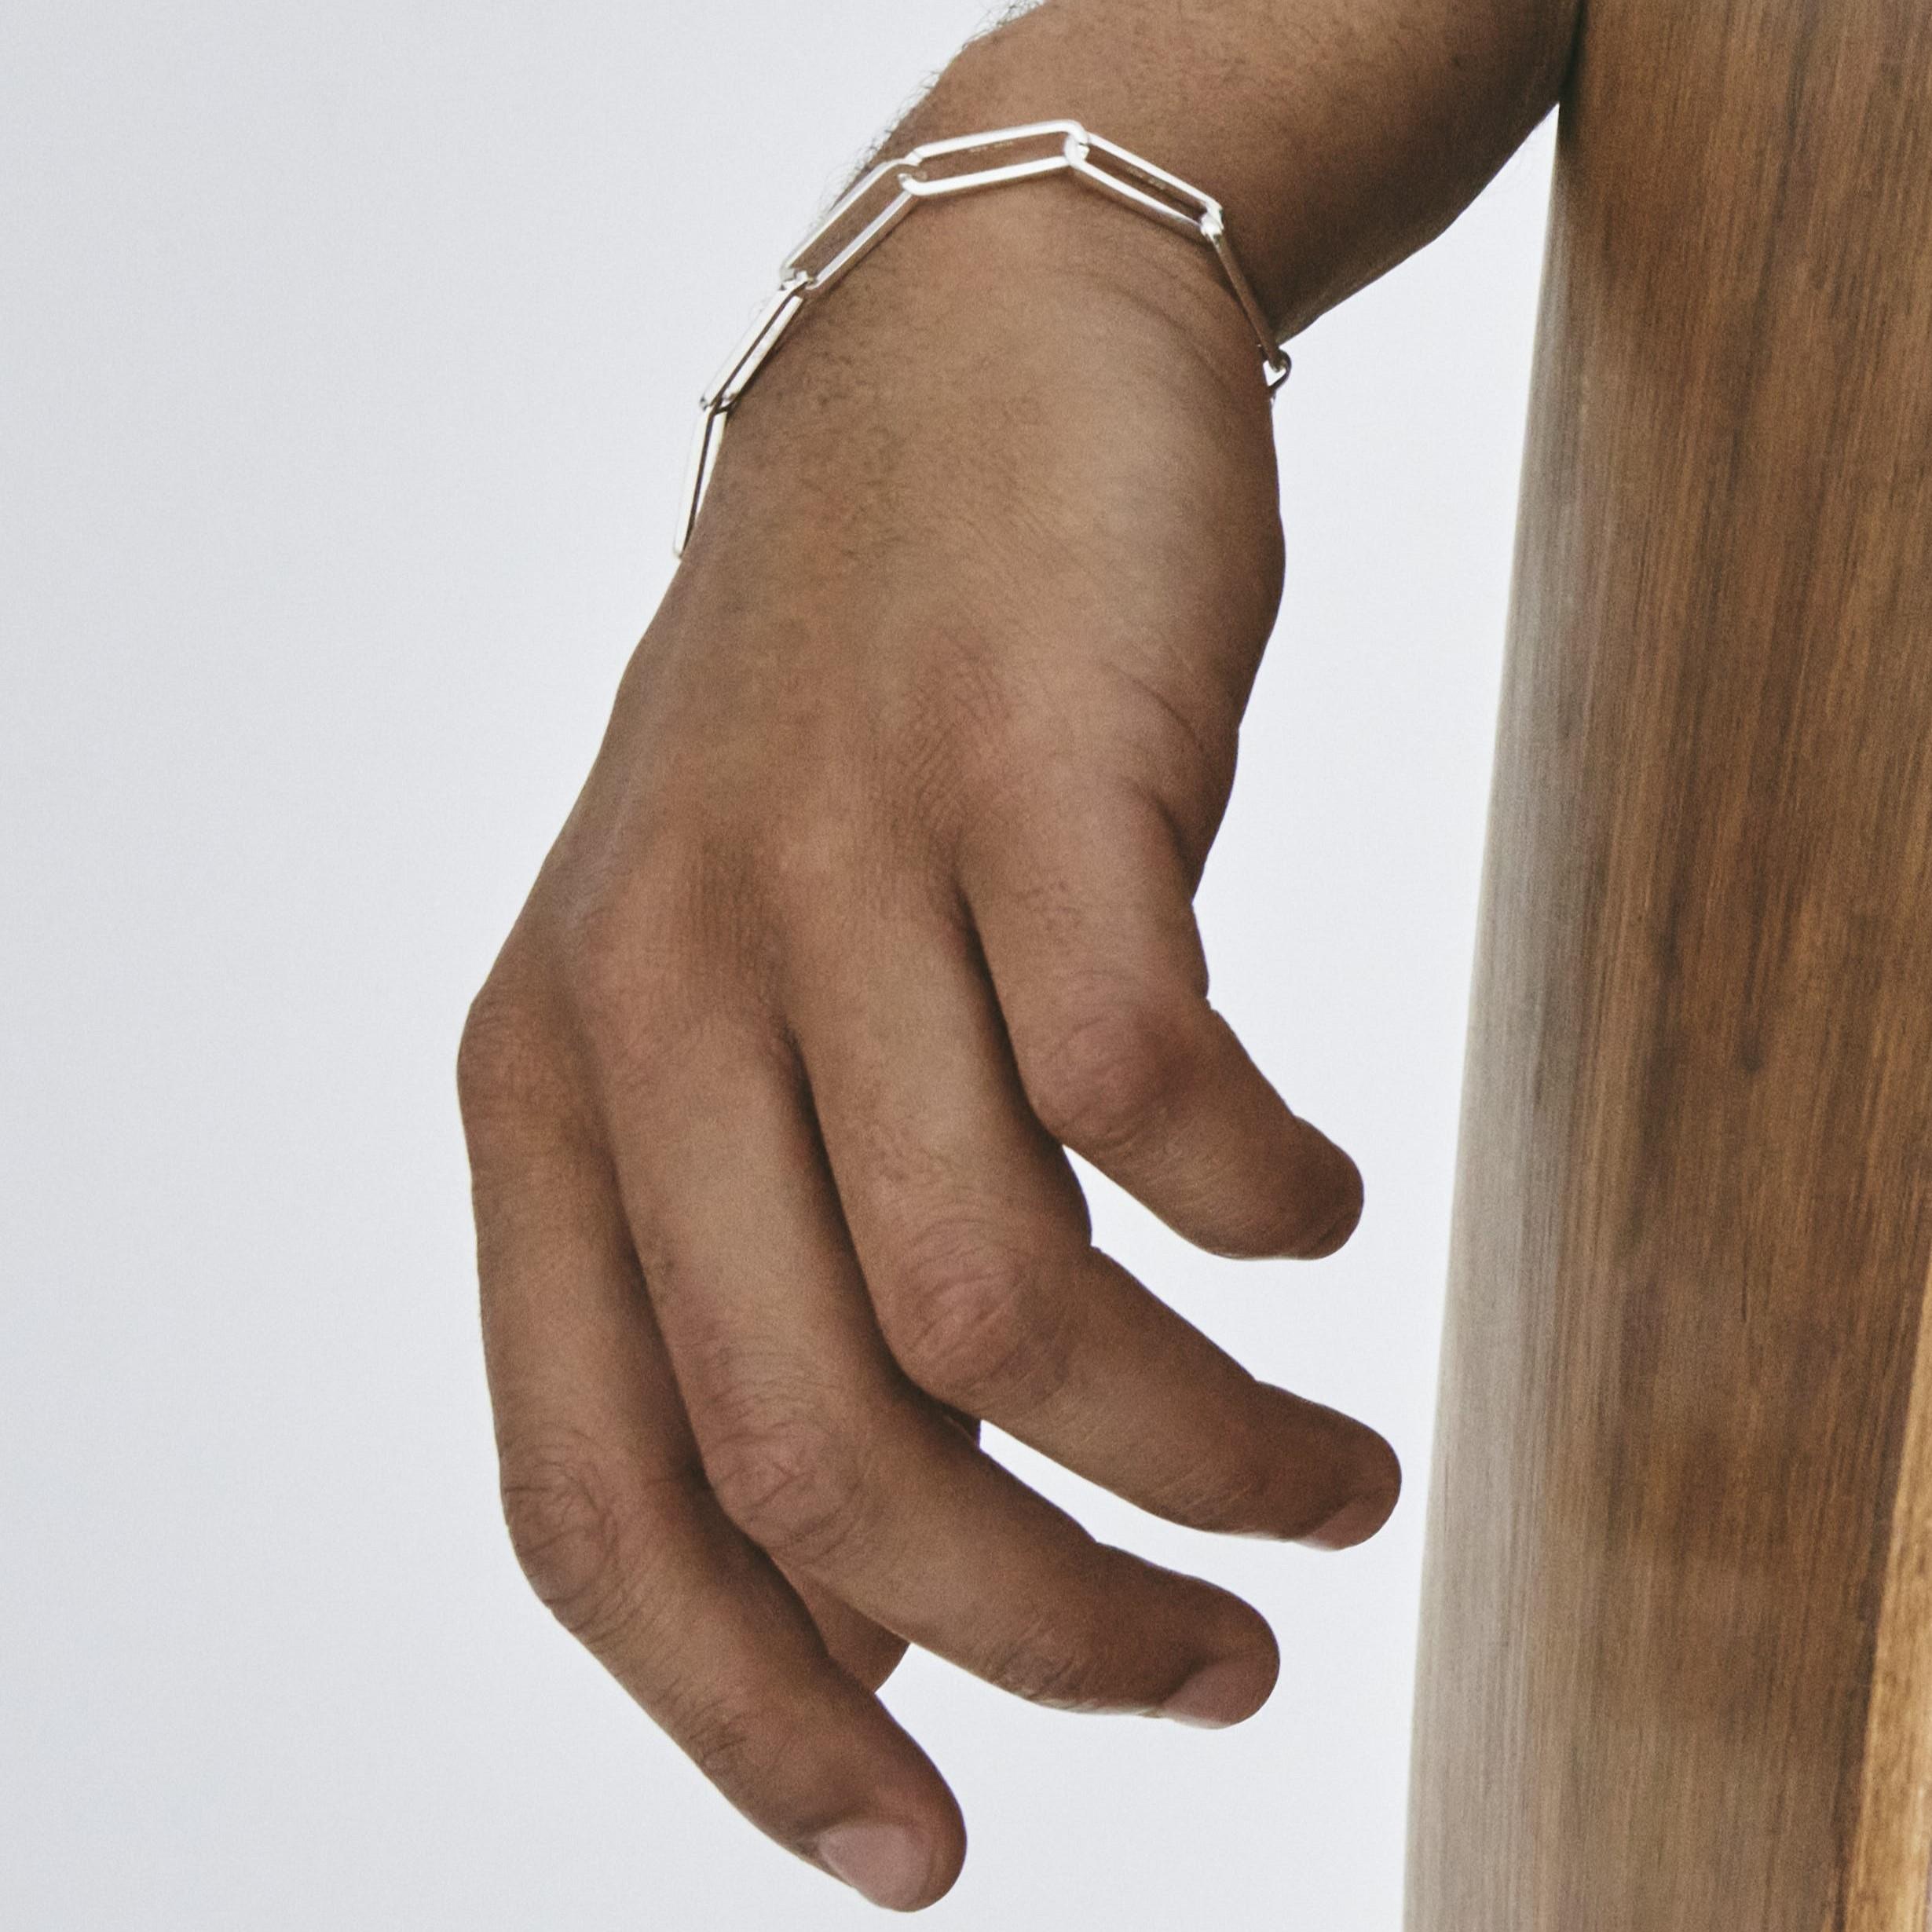 Also available in sterling silver with 1 gold link; 18k gold with 1 silver link, and in small size.

A superb bracelet of links in recycled sterling silver. Inspired by classic Scandinavian design and the ancient art of Japanese wood joinery, each